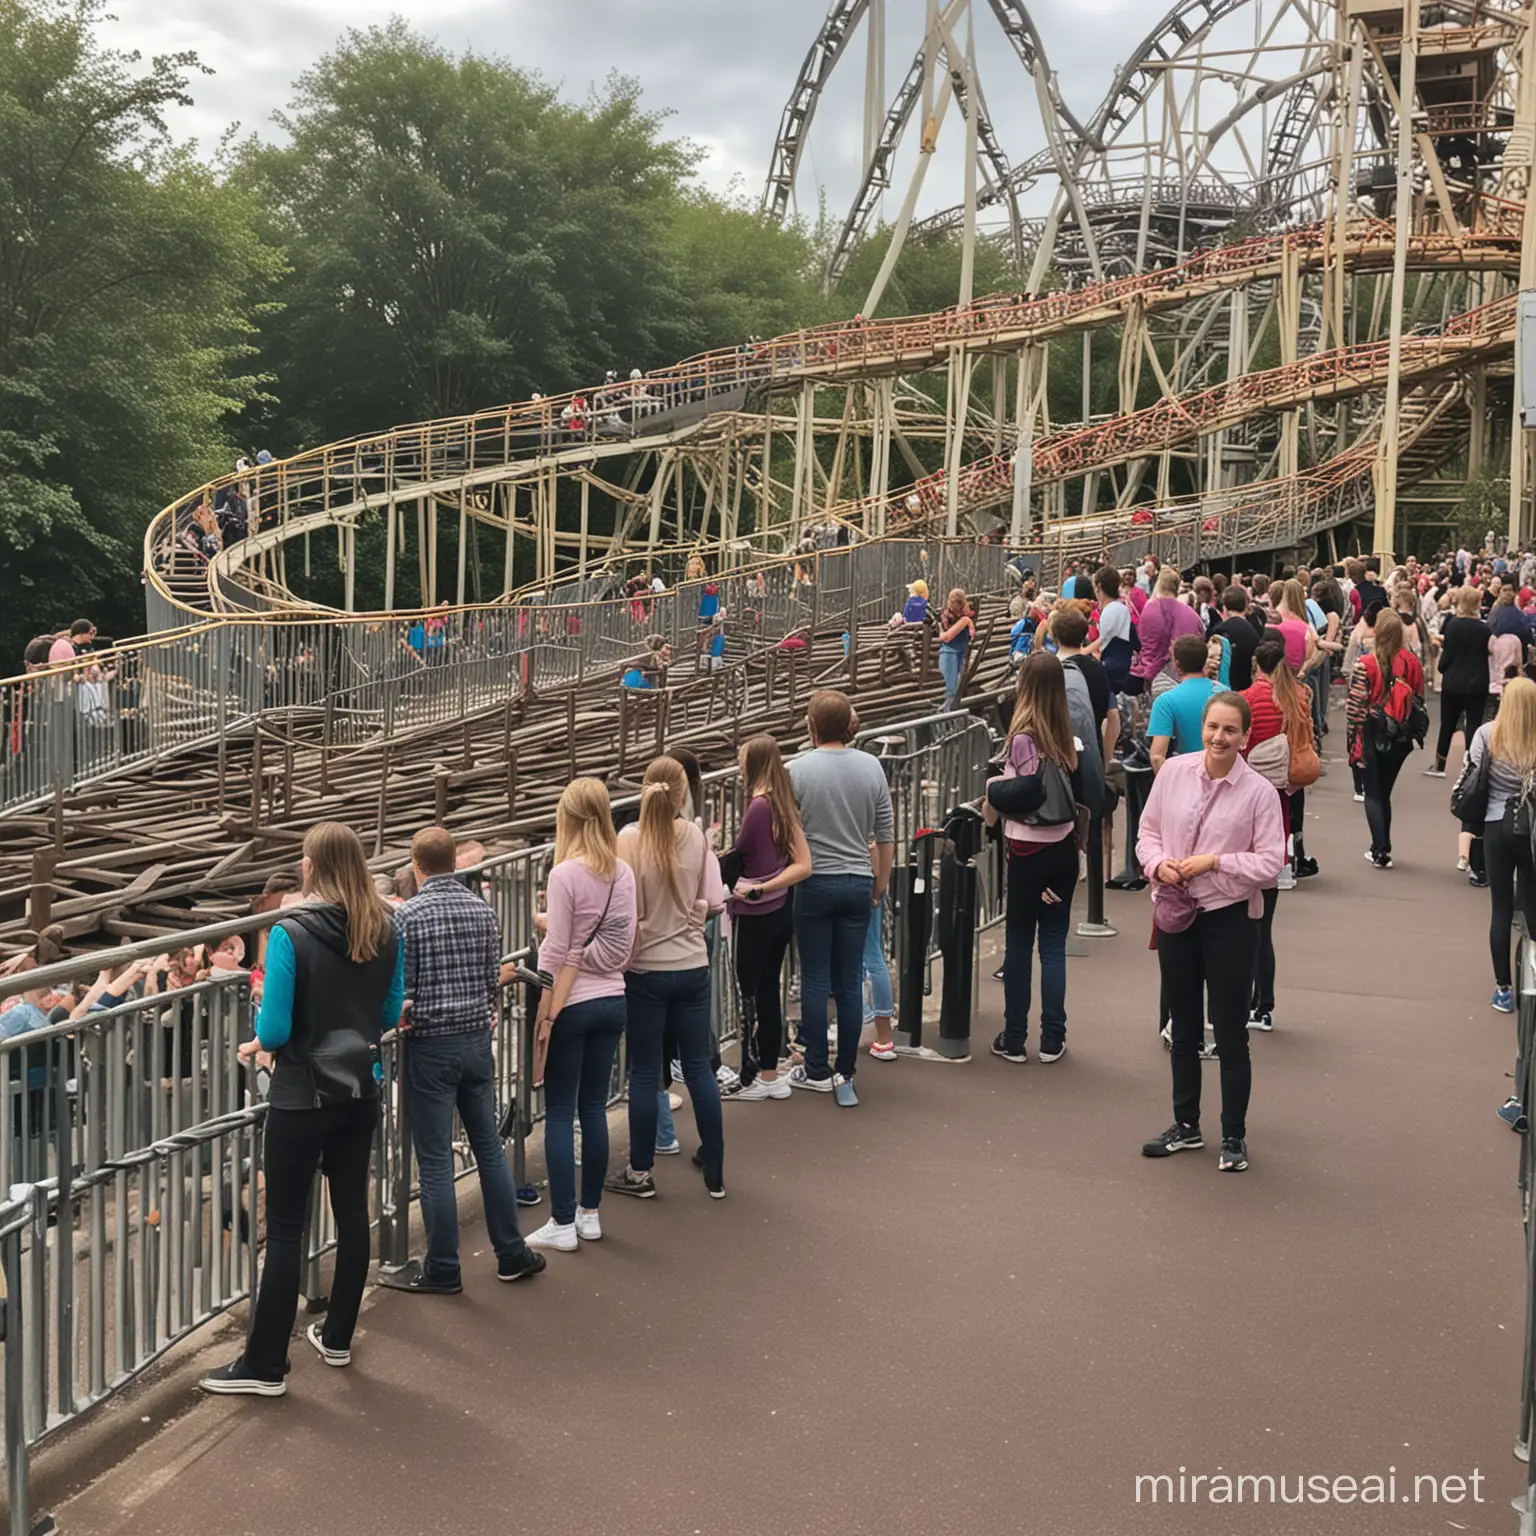 the queue line waiting to ride on a rollercoaster